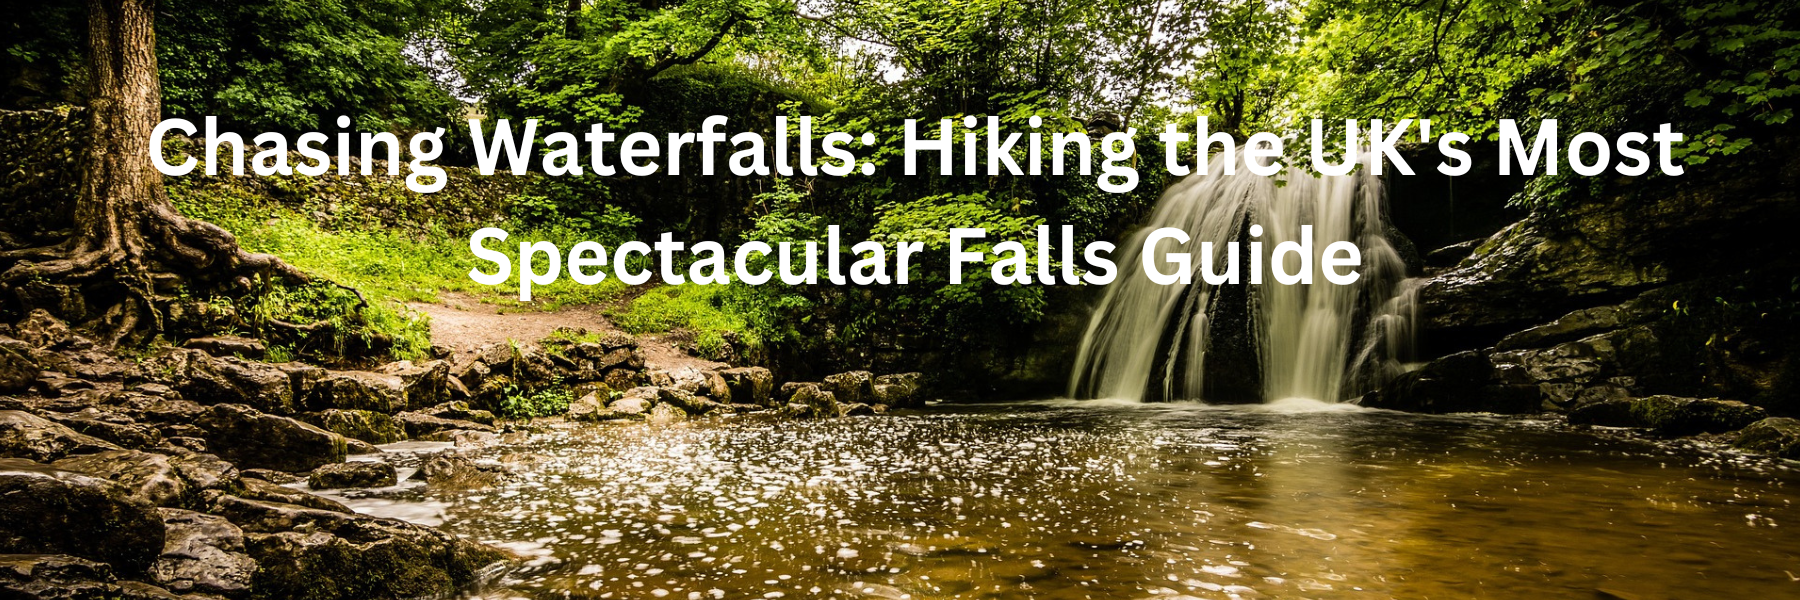 Chasing Waterfalls Hiking the UK's Most Spectacular Falls Guide